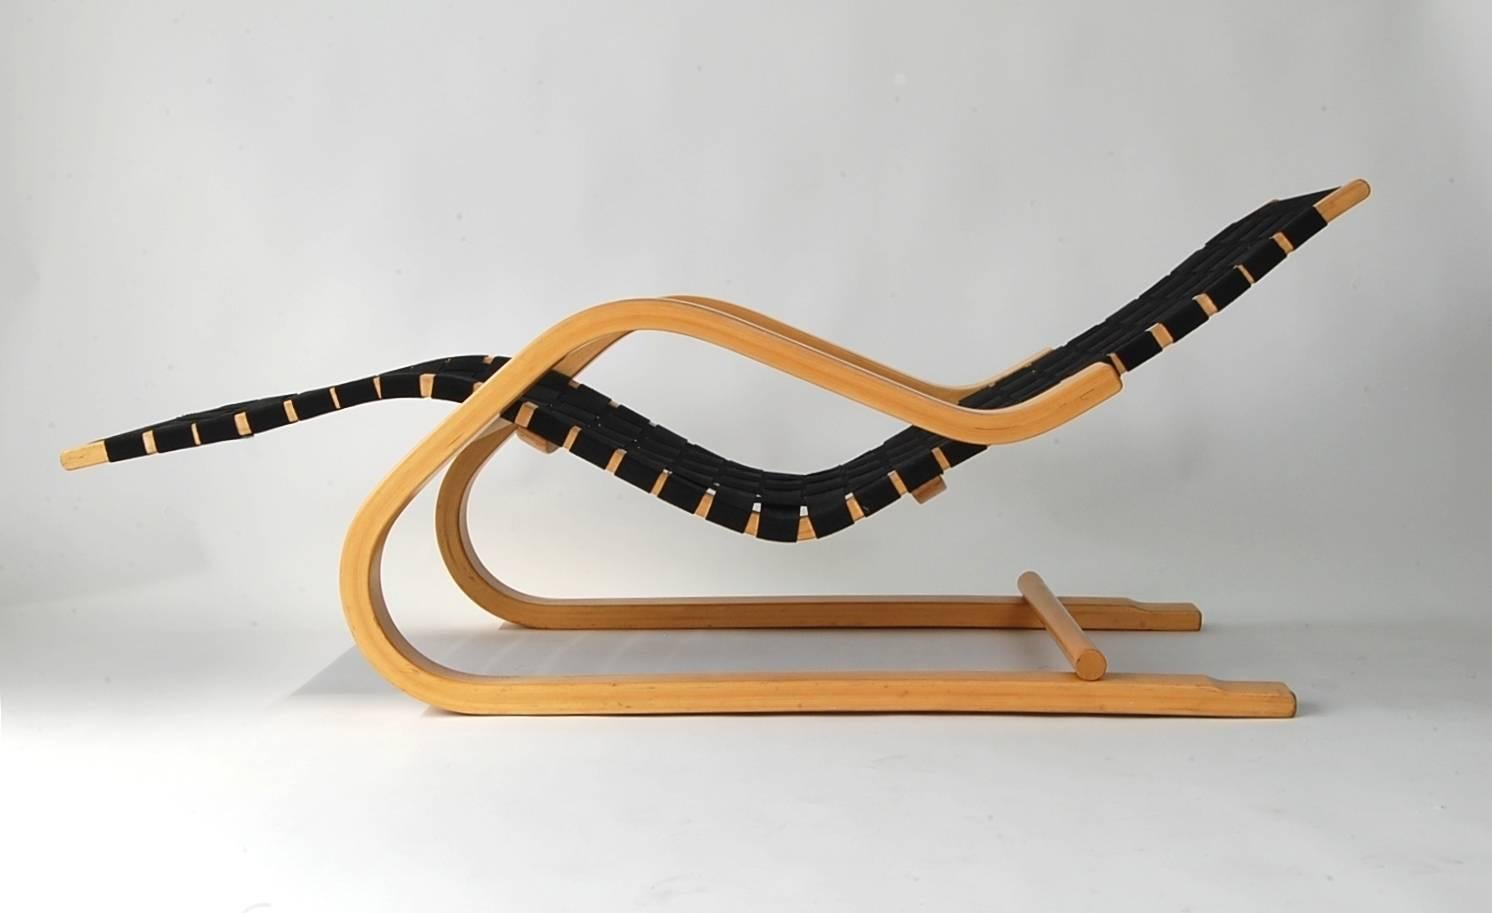 Model 43 chaise longue, designed by Alvar Aalto. The model 43 chaise longue was first shown in the Finnish Pavilion designed by Aalto for the Paris World's Fair in 1936. This example produced by Artek of Finland in the 1970s.

We offer free